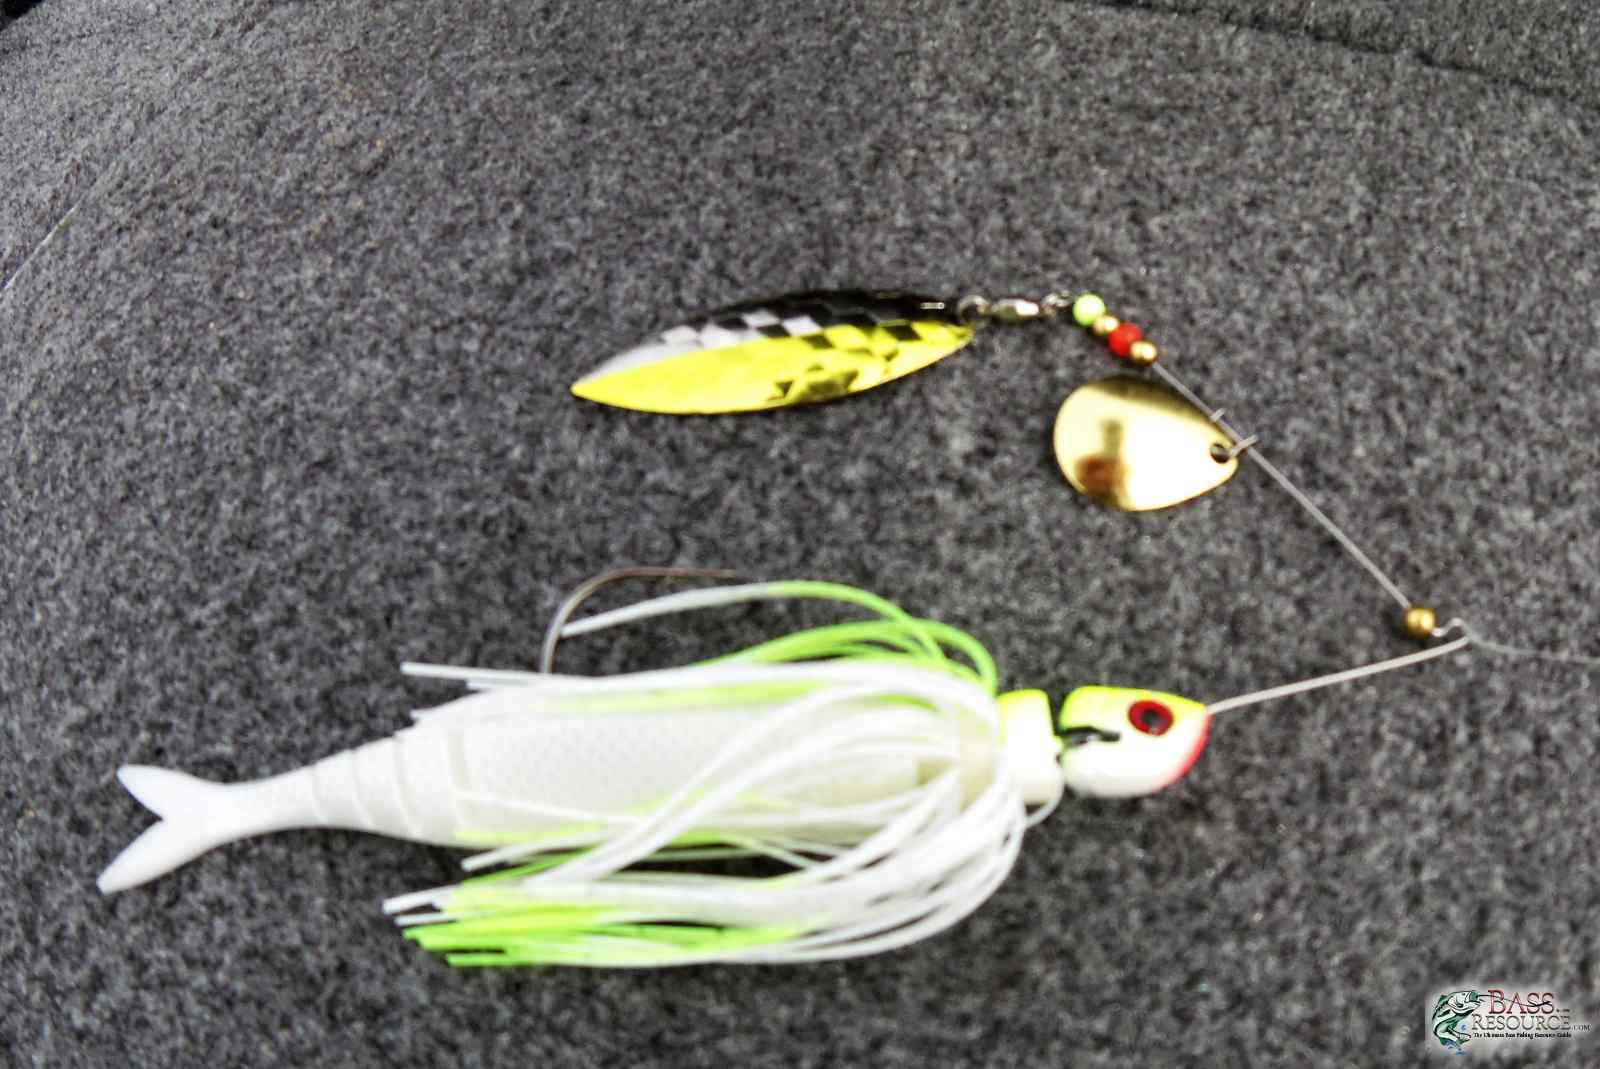 A trailer on a spinnerbait or not? - Fishing Tackle - Bass Fishing Forums